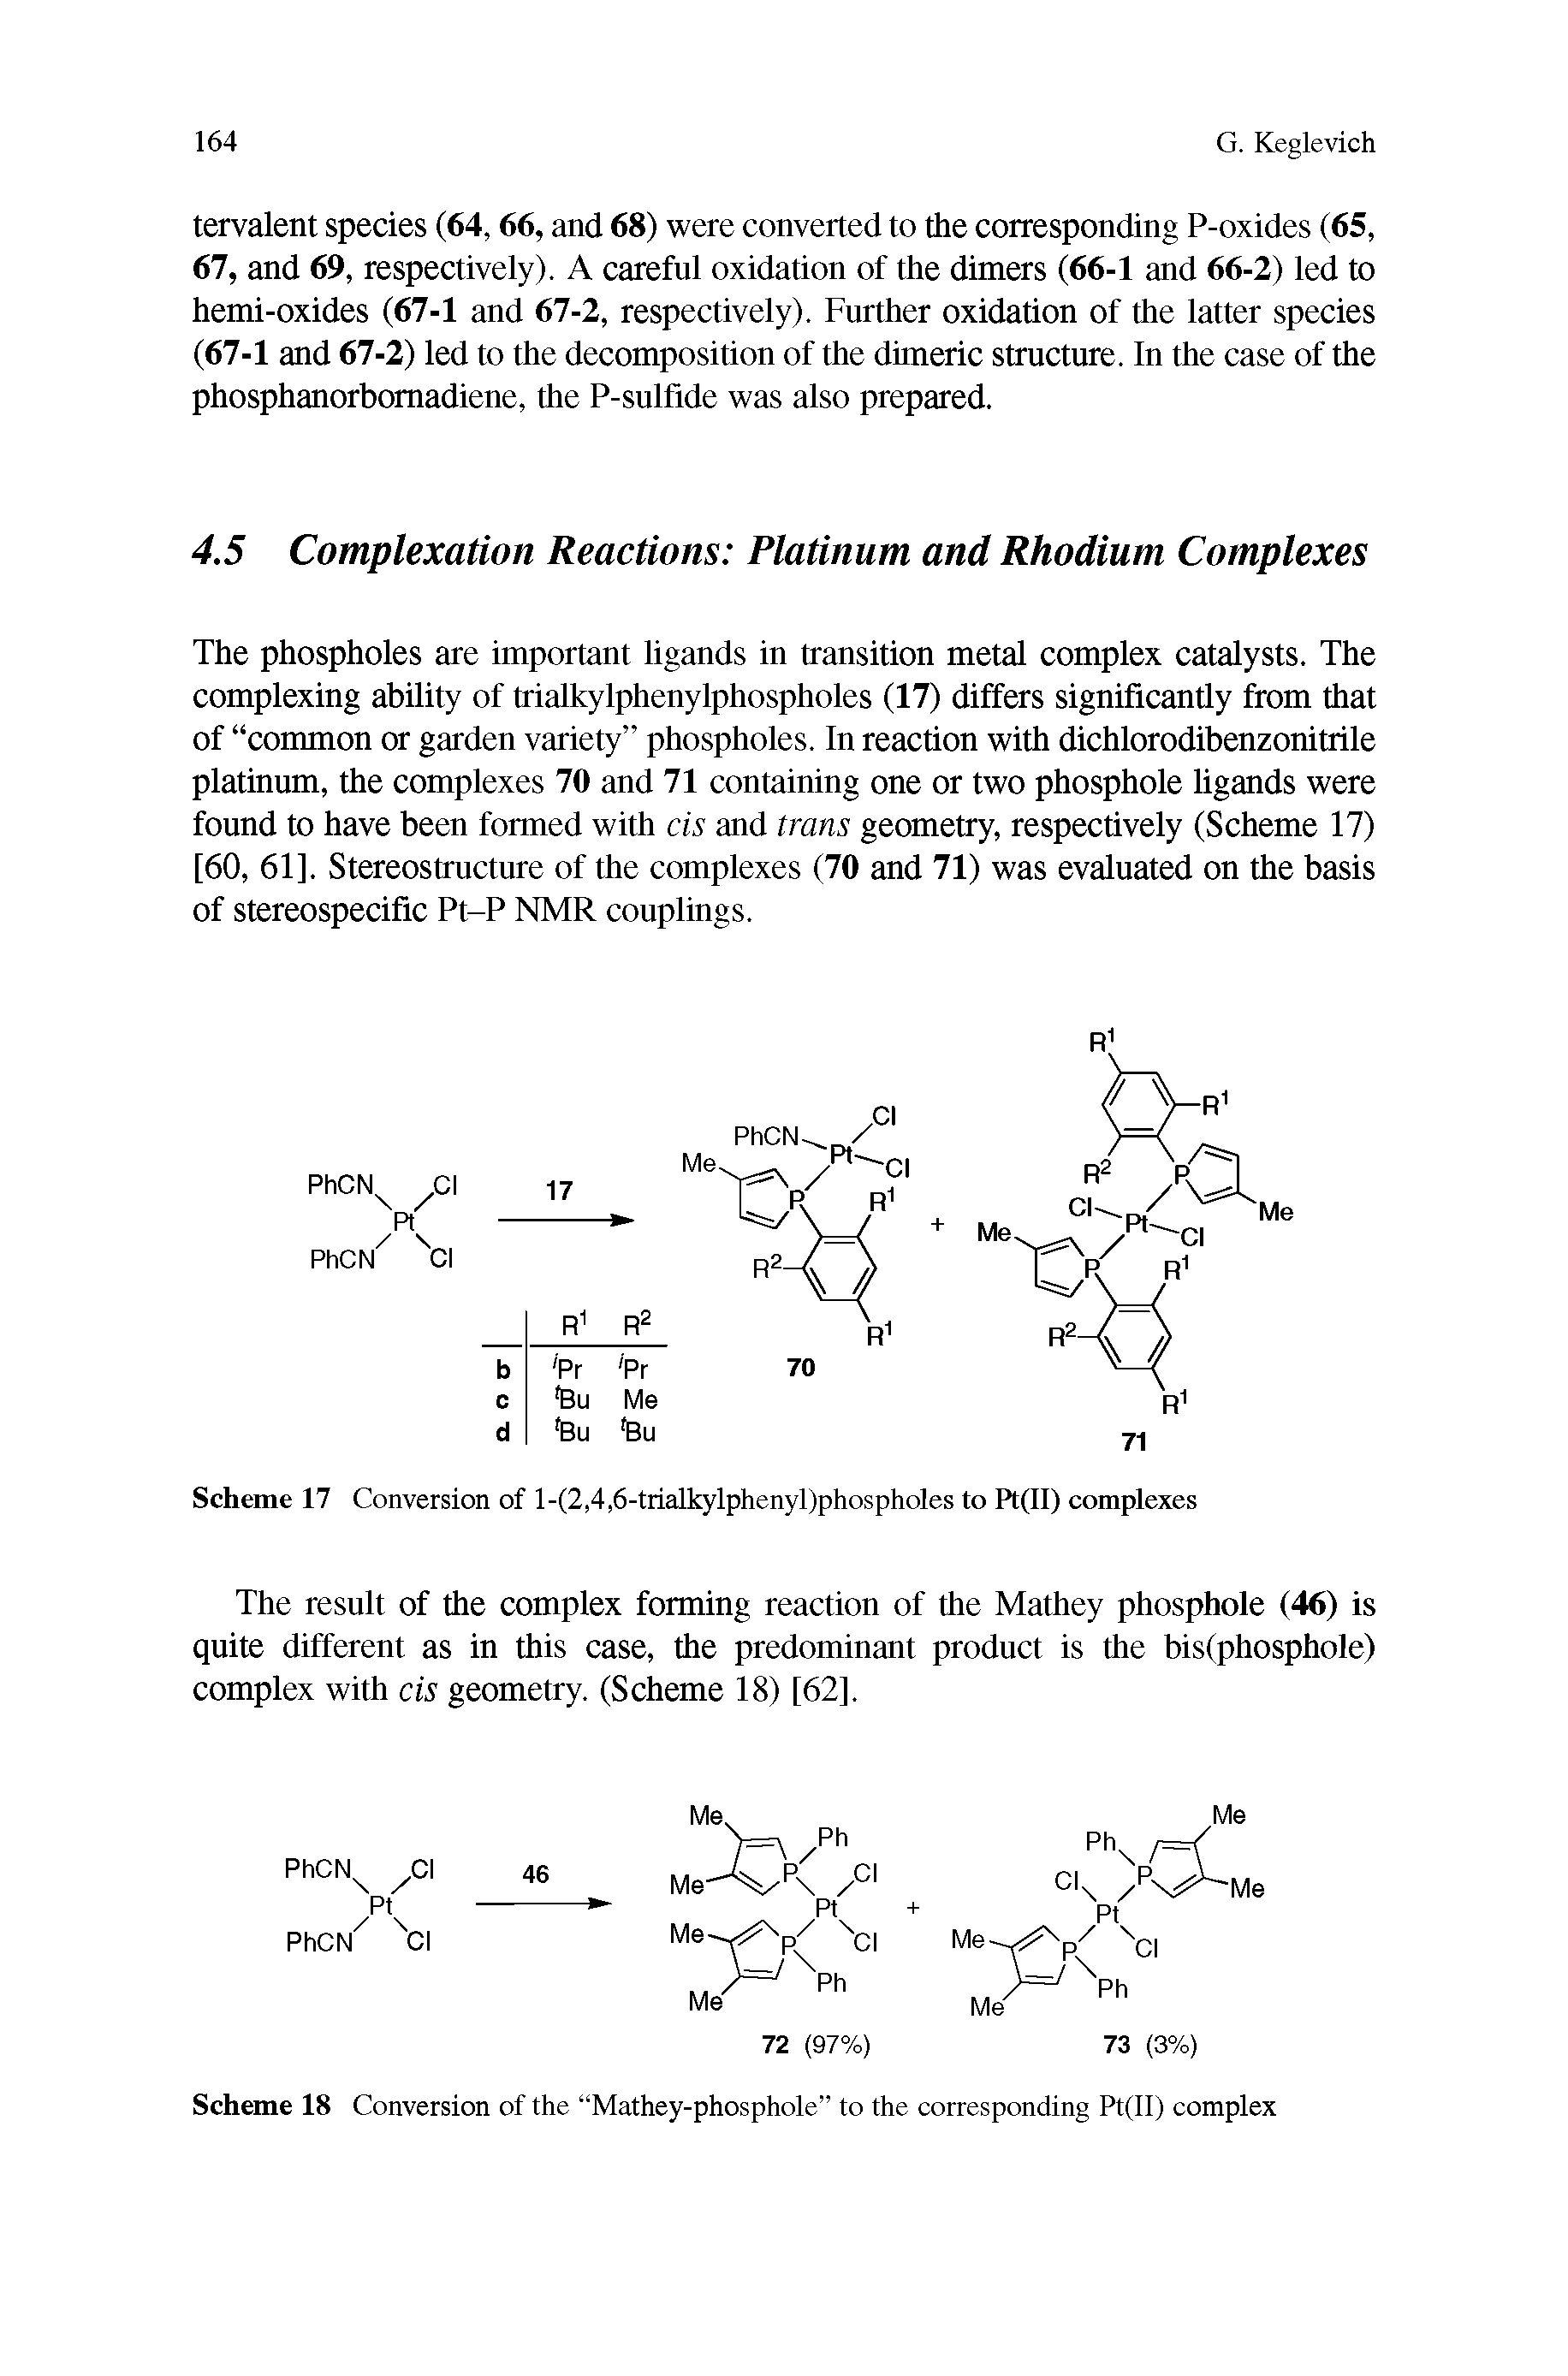 Scheme 18 Conversion of the Mathey-phosphole to the corresponding Pt(II) complex...